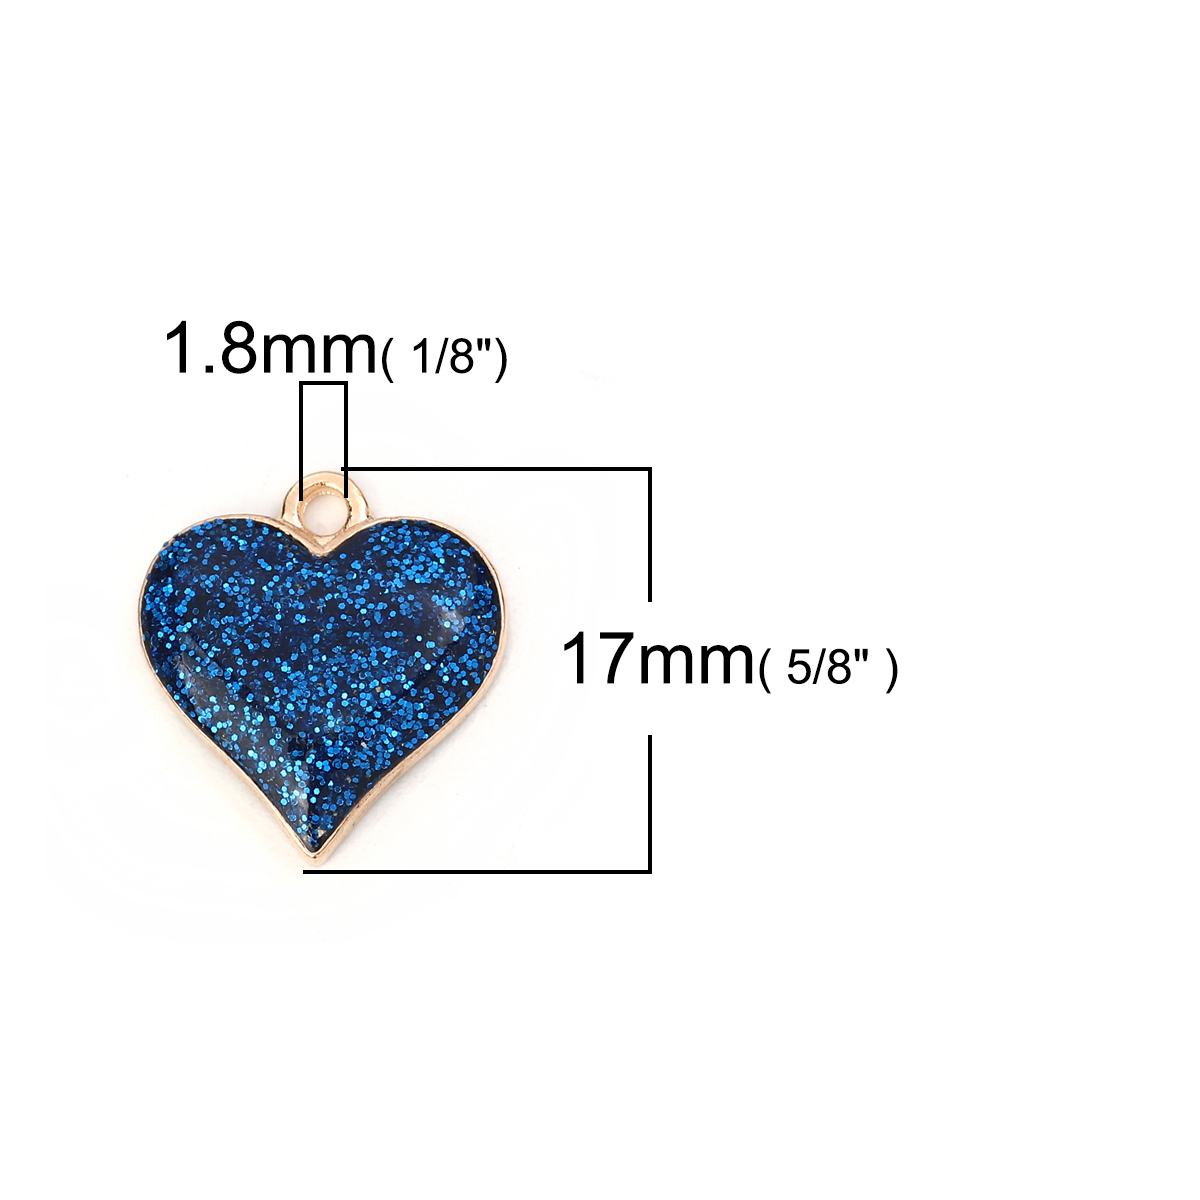 Picture of Zinc Based Alloy Charms Heart Gold Plated Royal Blue Glitter 17mm( 5/8") x 16mm( 5/8"), 10 PCs